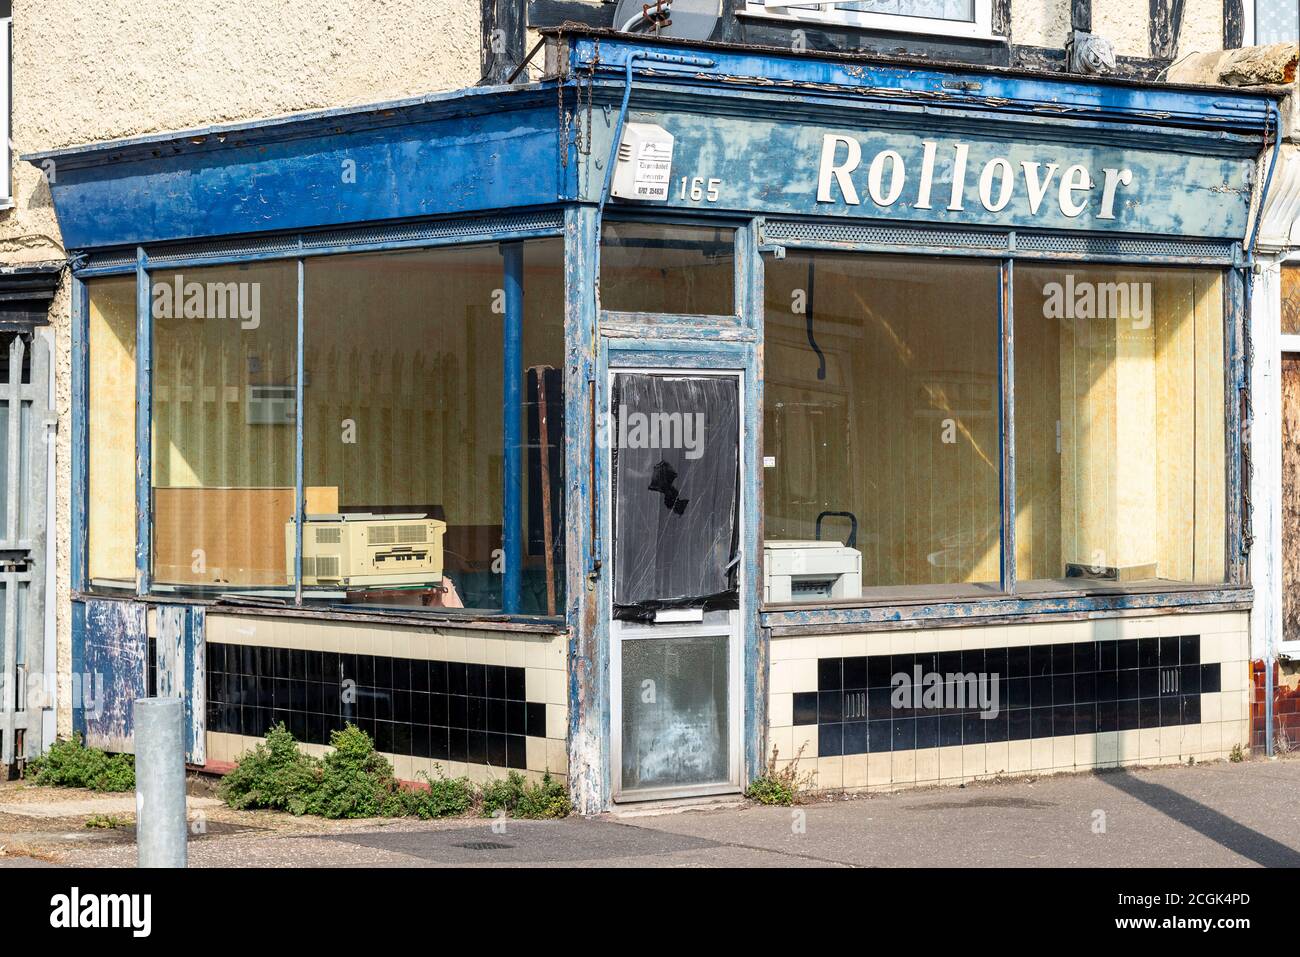 Decaying empty shop named Rollover, in Westcliff on Sea, Southend, Essex, UK. Long term vacant dilapidated business property with old equipment left Stock Photo